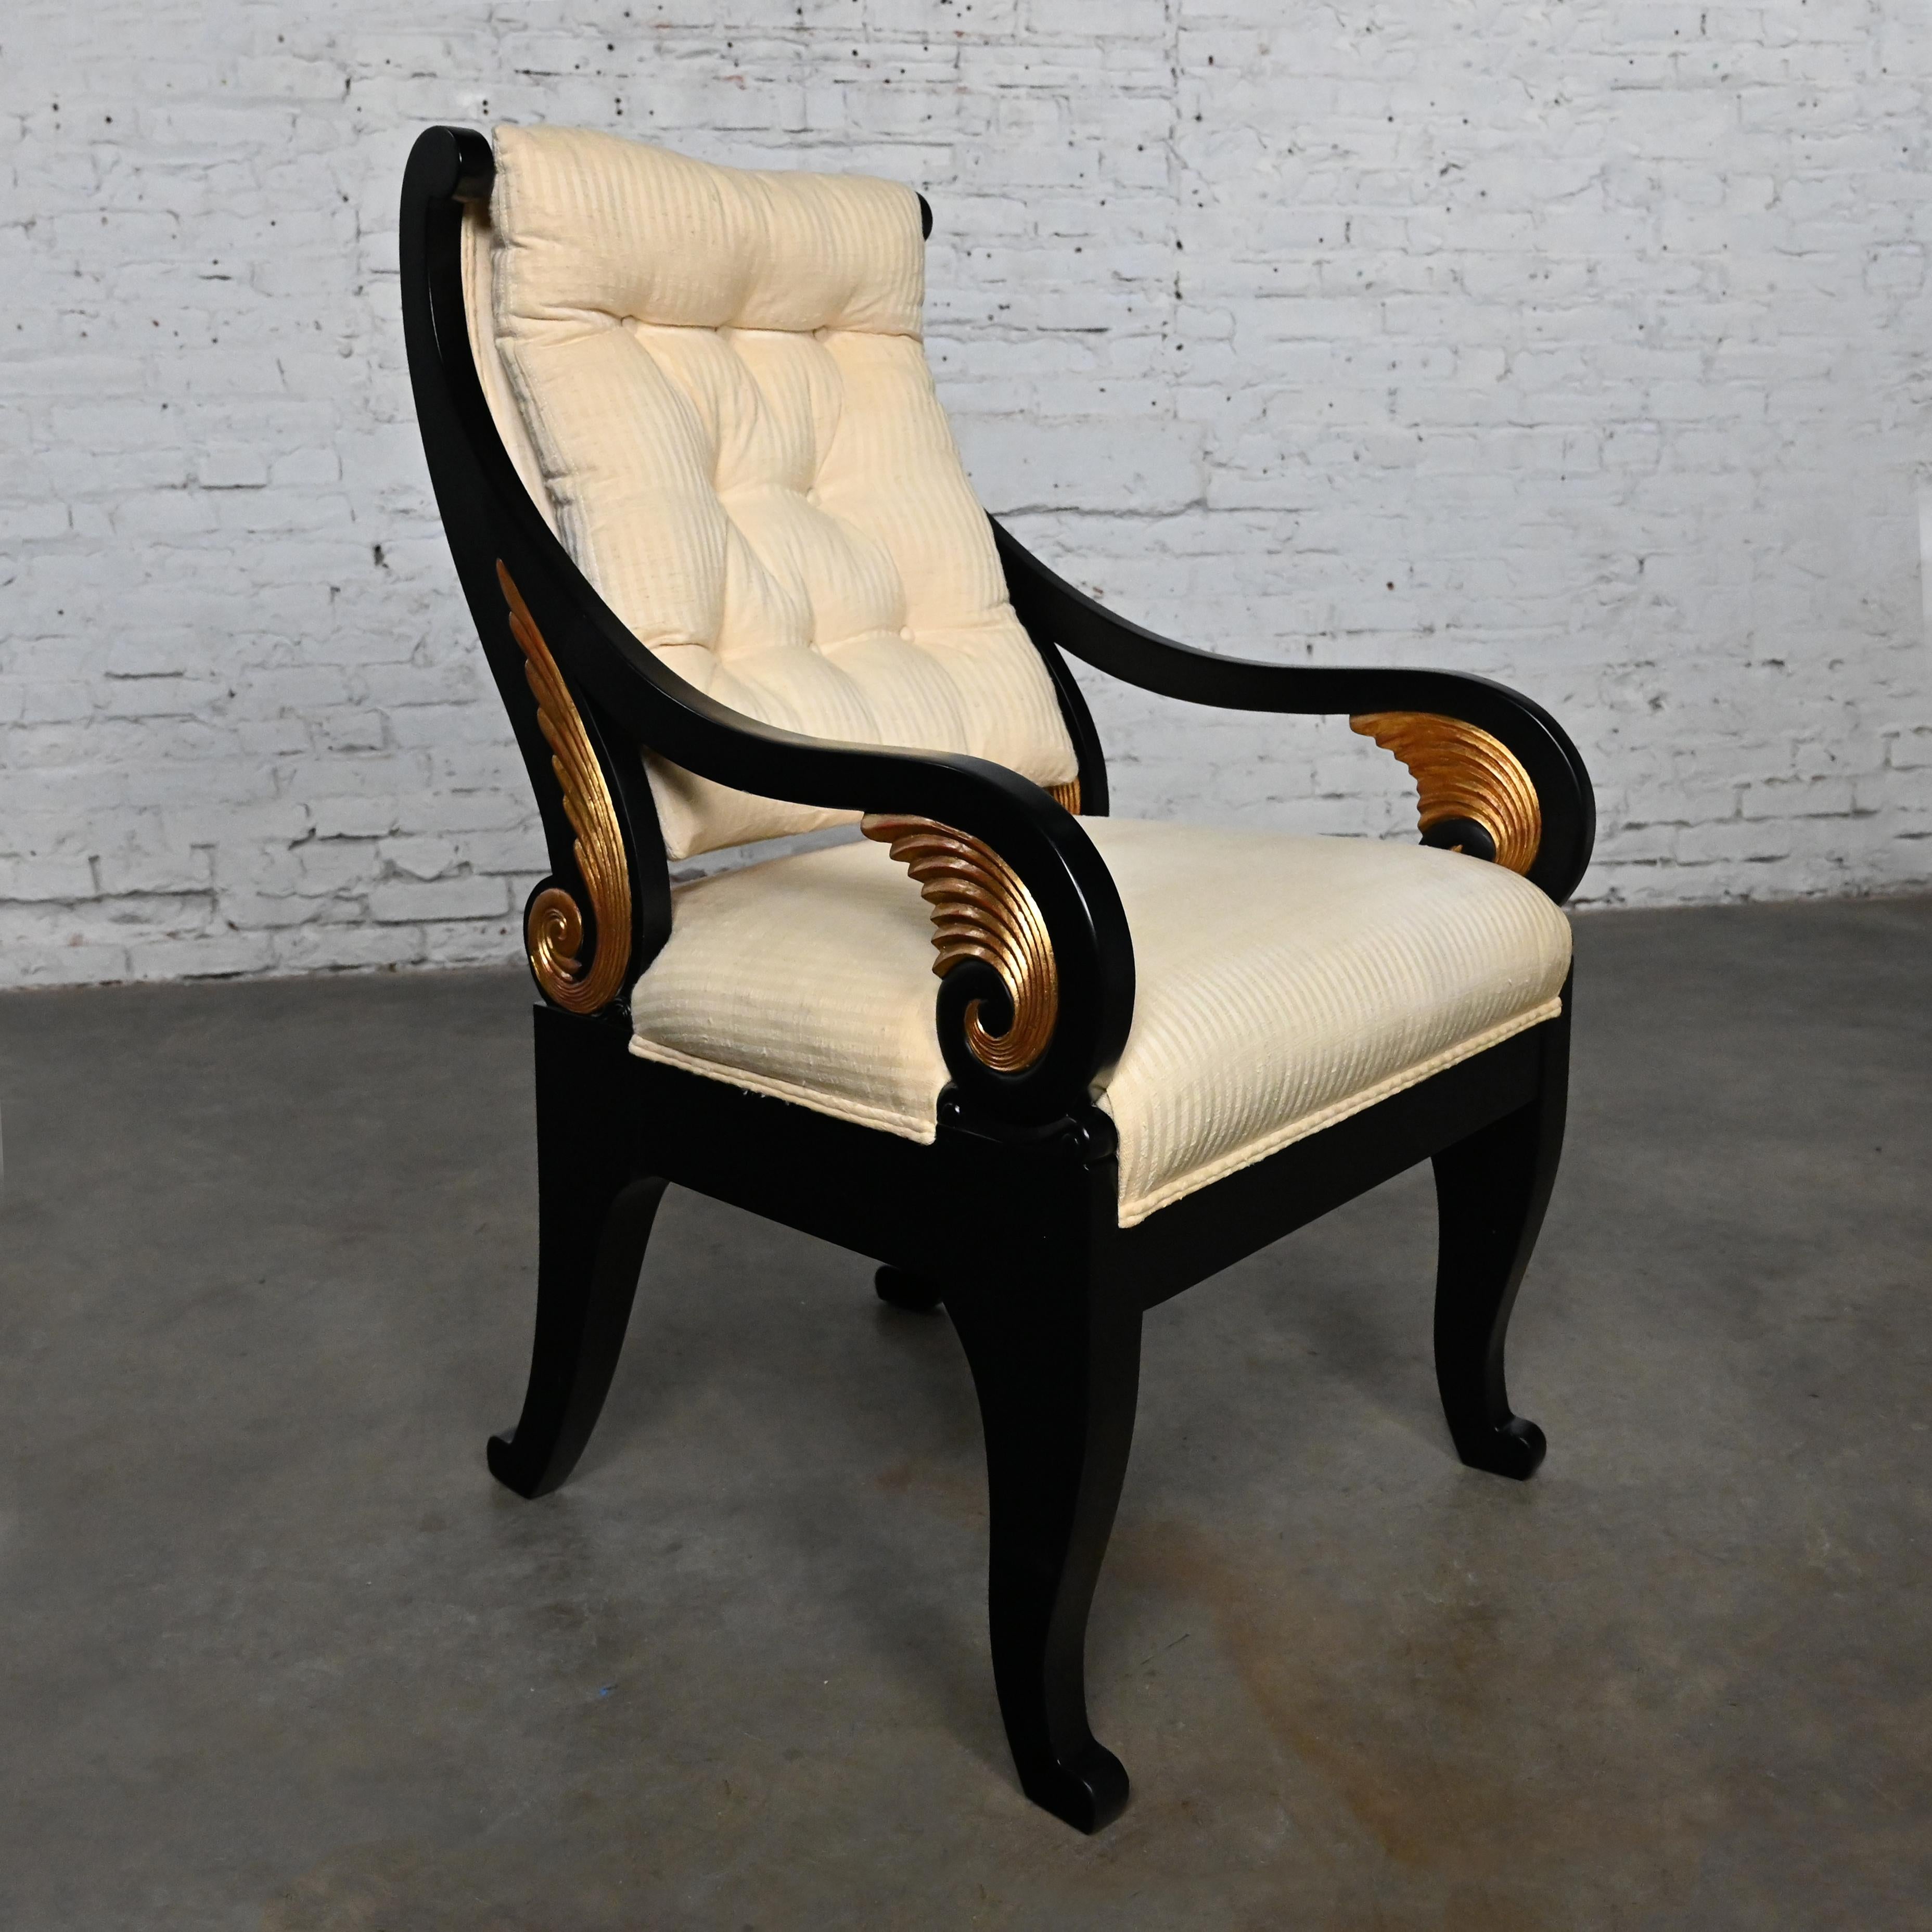 Late 20th Neoclassic Revival Black Side Chair Gilt Wing Accents Off-White Fabric For Sale 13